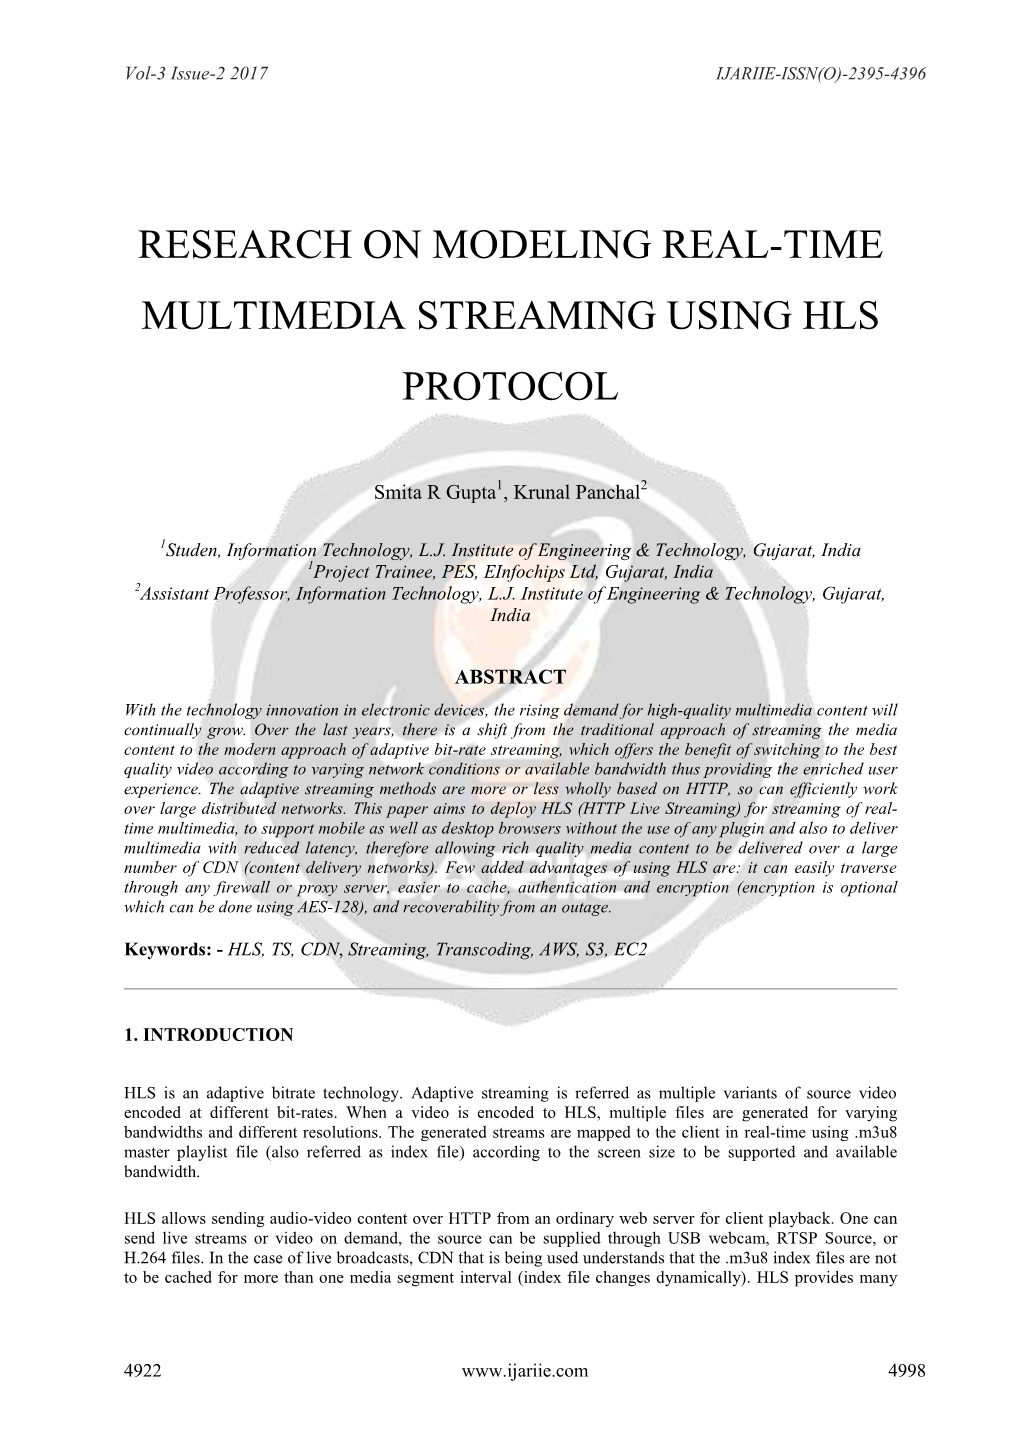 Research on Modeling Real-Time Multimedia Streaming Using Hls Protocol